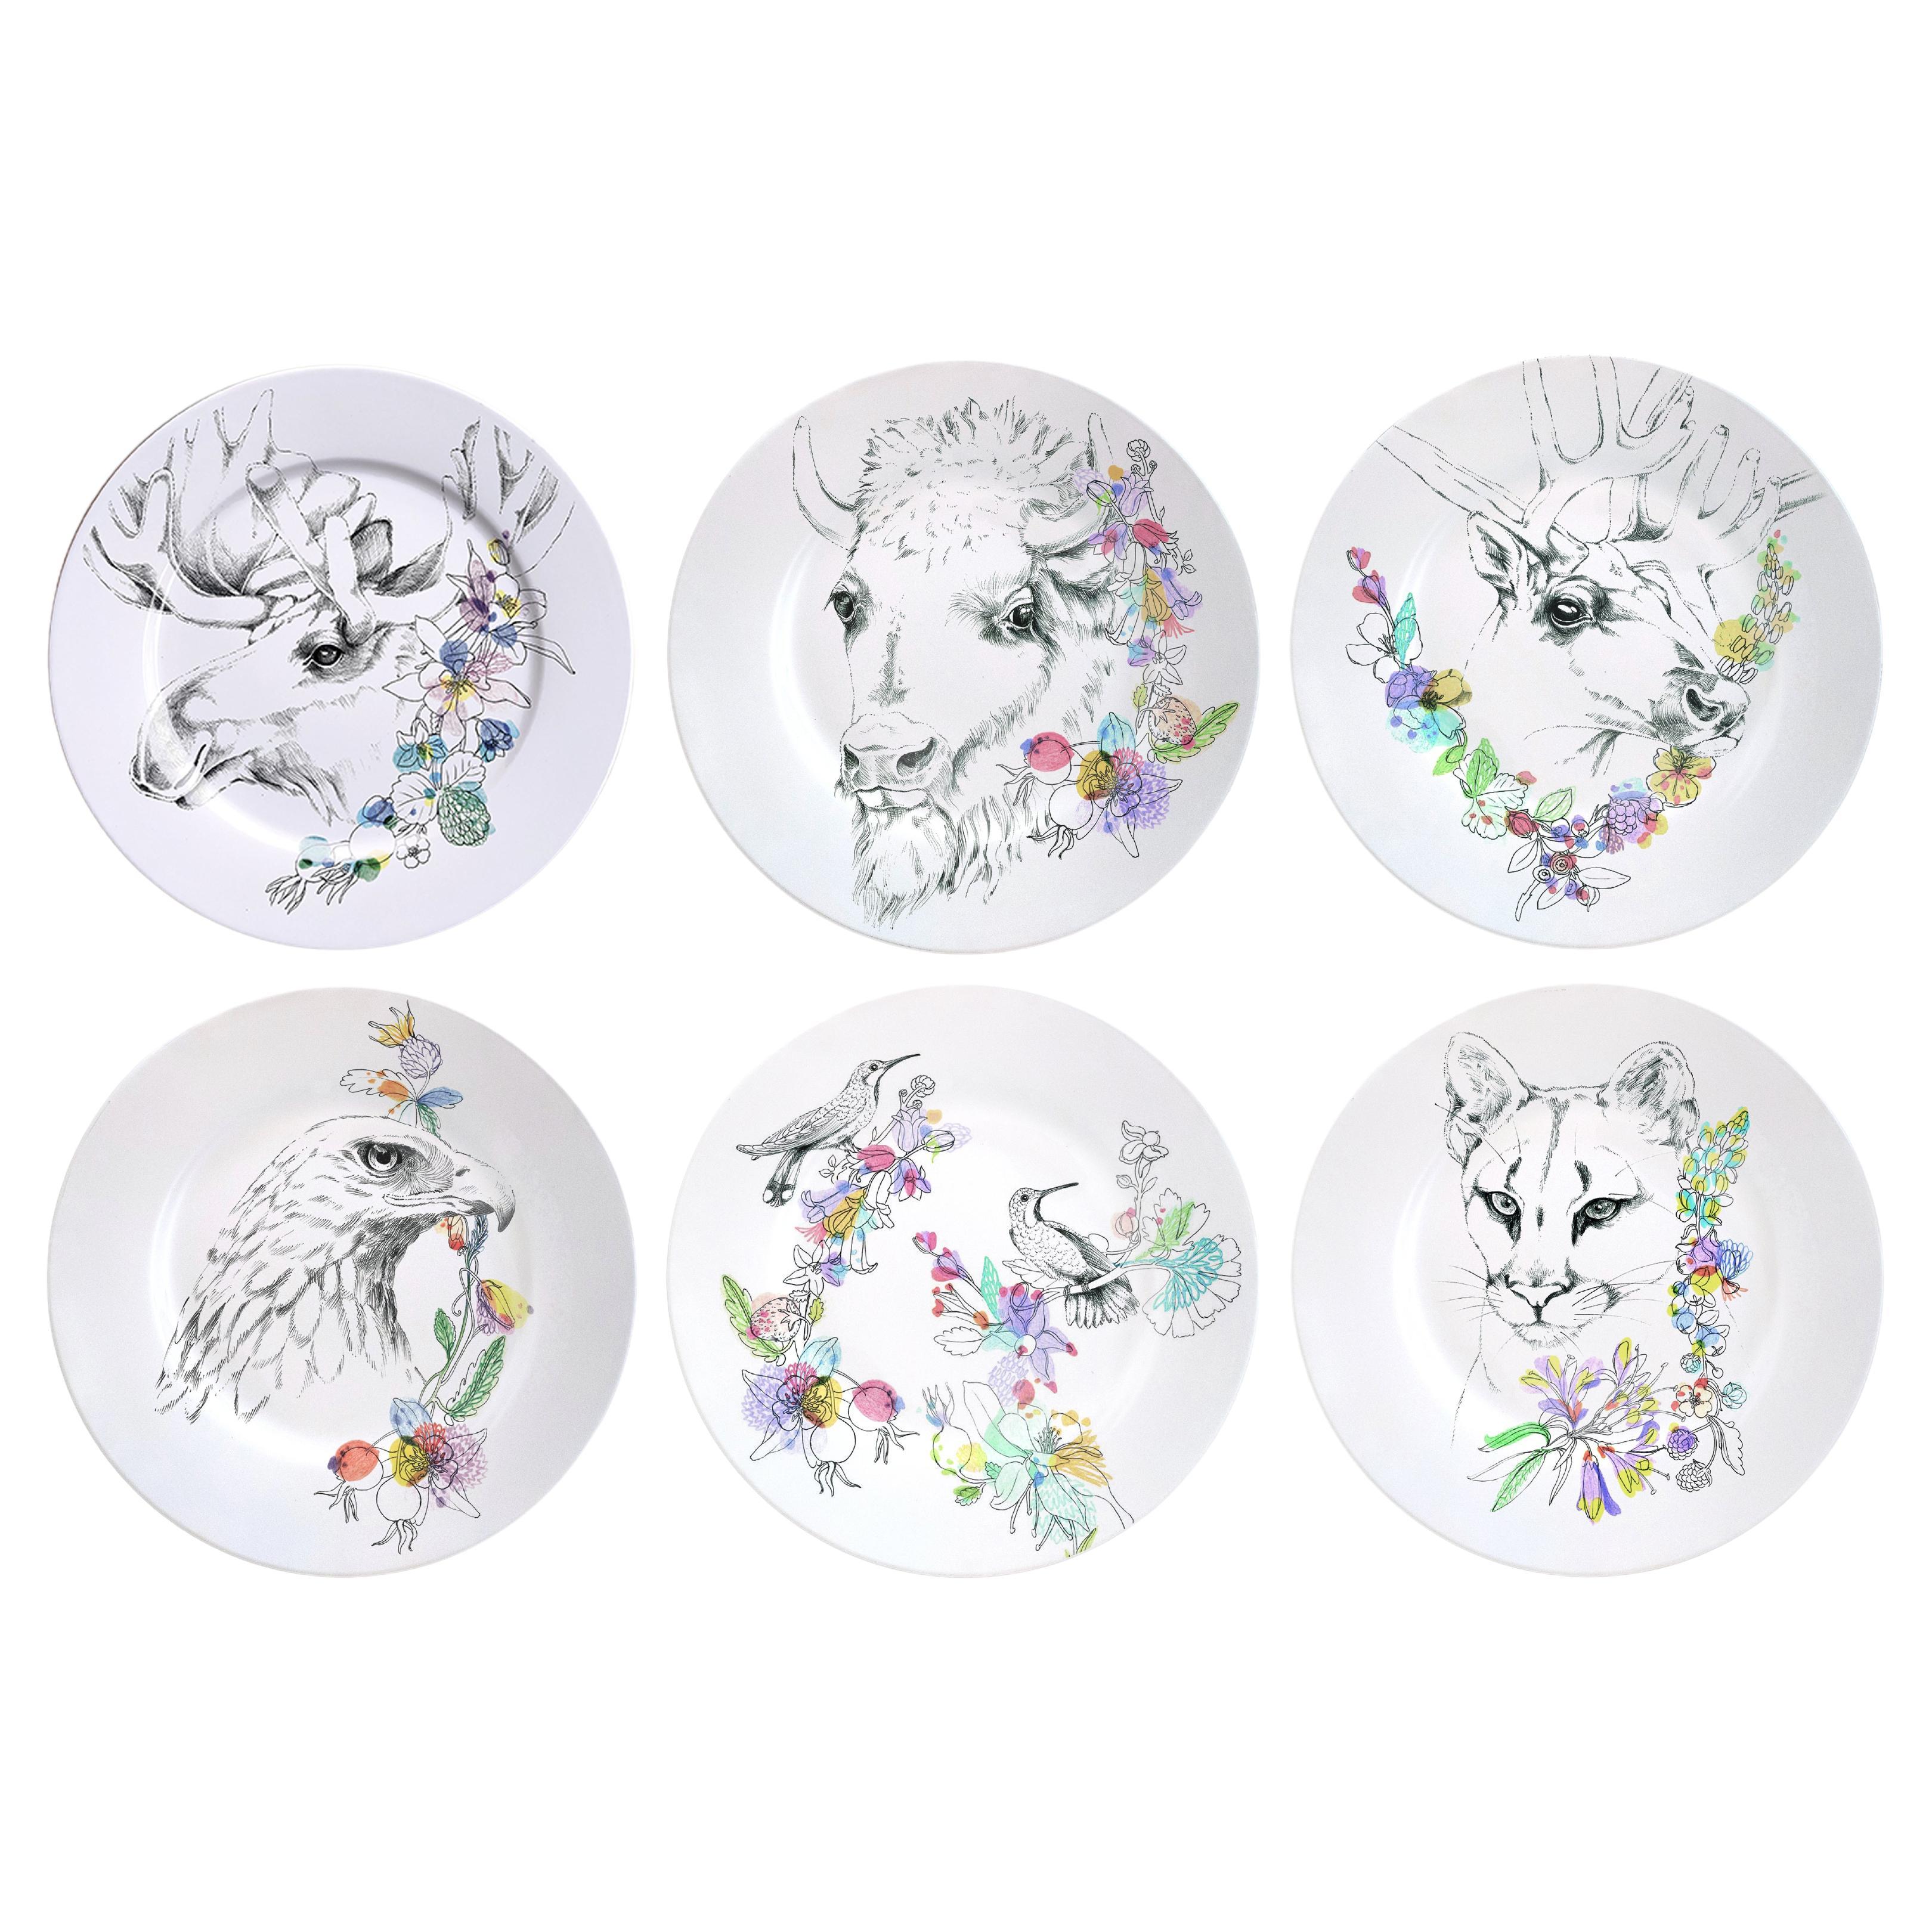 Ode to the Woods, Six Contemporary Porcelain Dinner Plates with Animals&Flowers For Sale